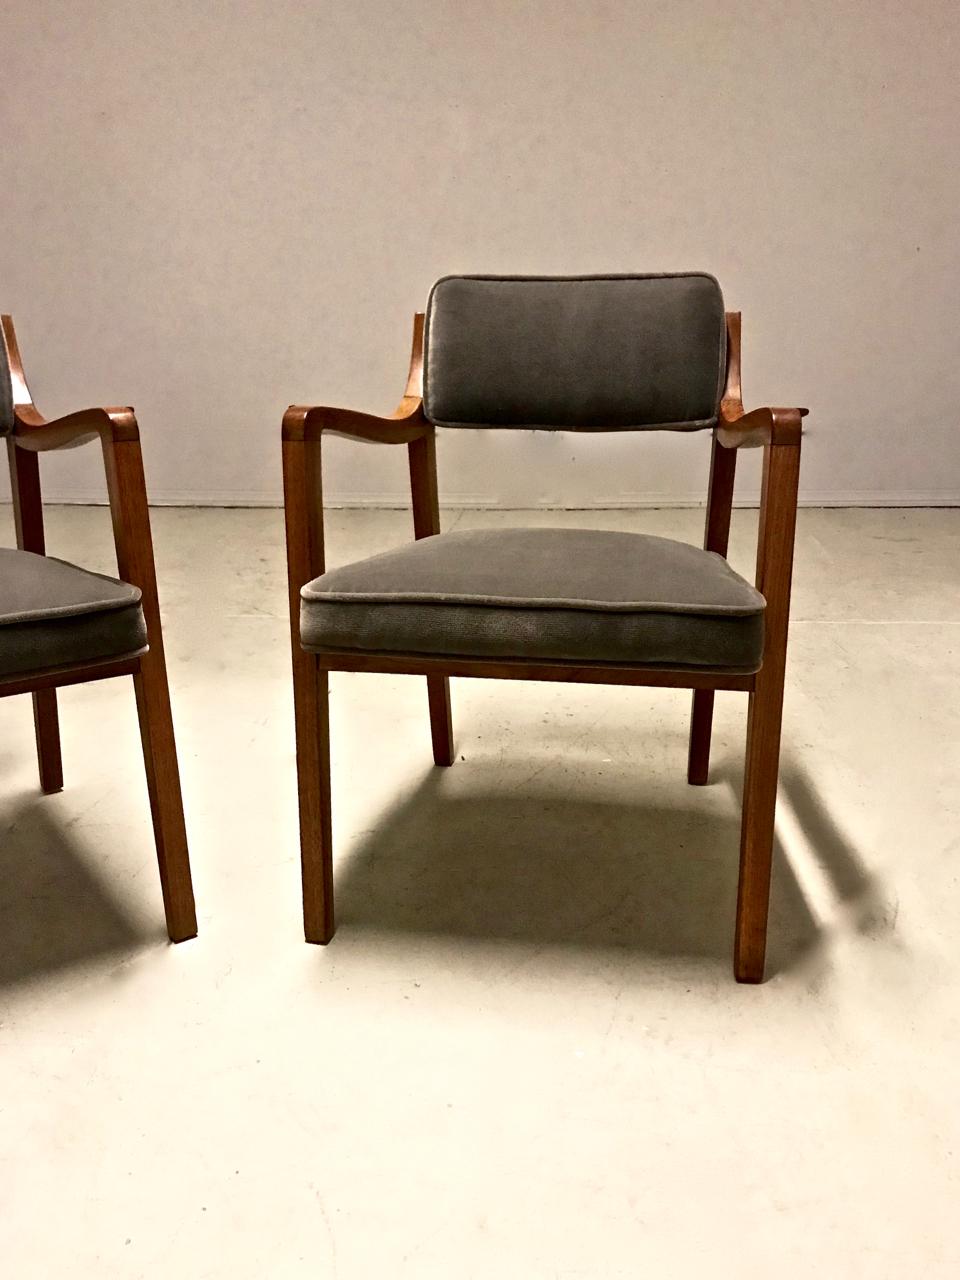 American Pair Edward Wormley for Dunbar Model 830 Lounge Chairs, 